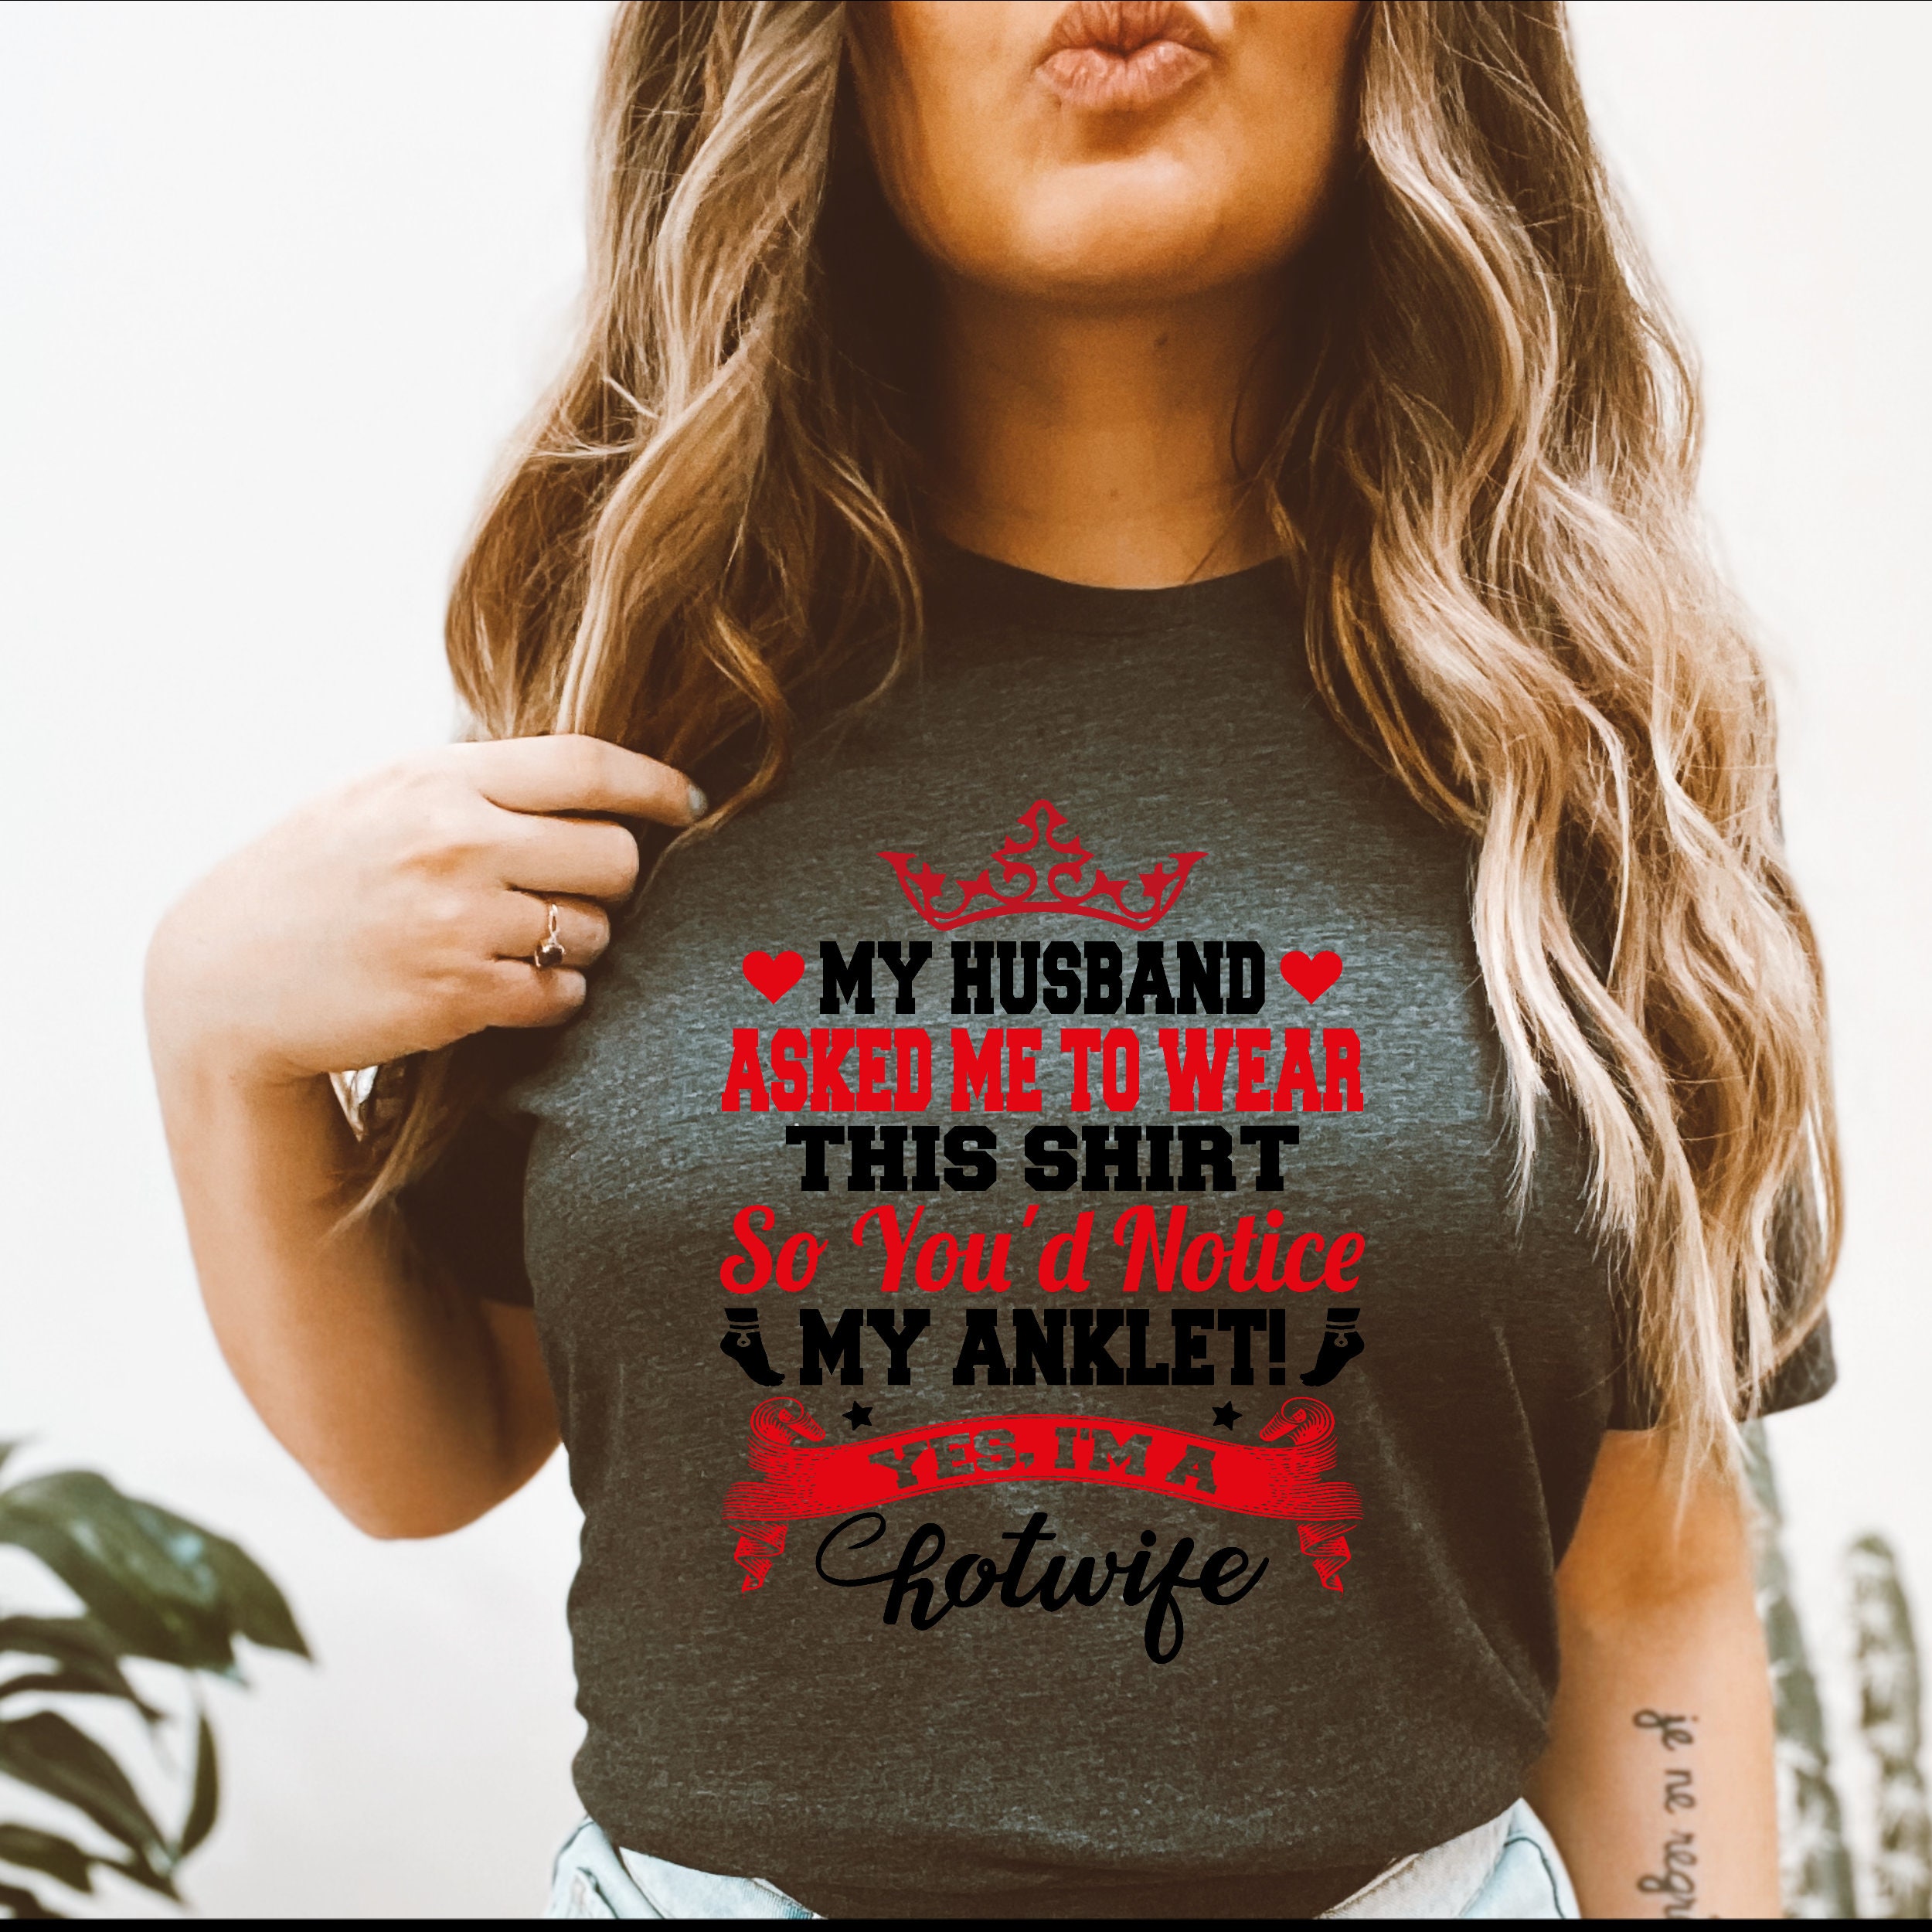 Hotwife T-shirt/sexy Gifts for Him/wife hq image